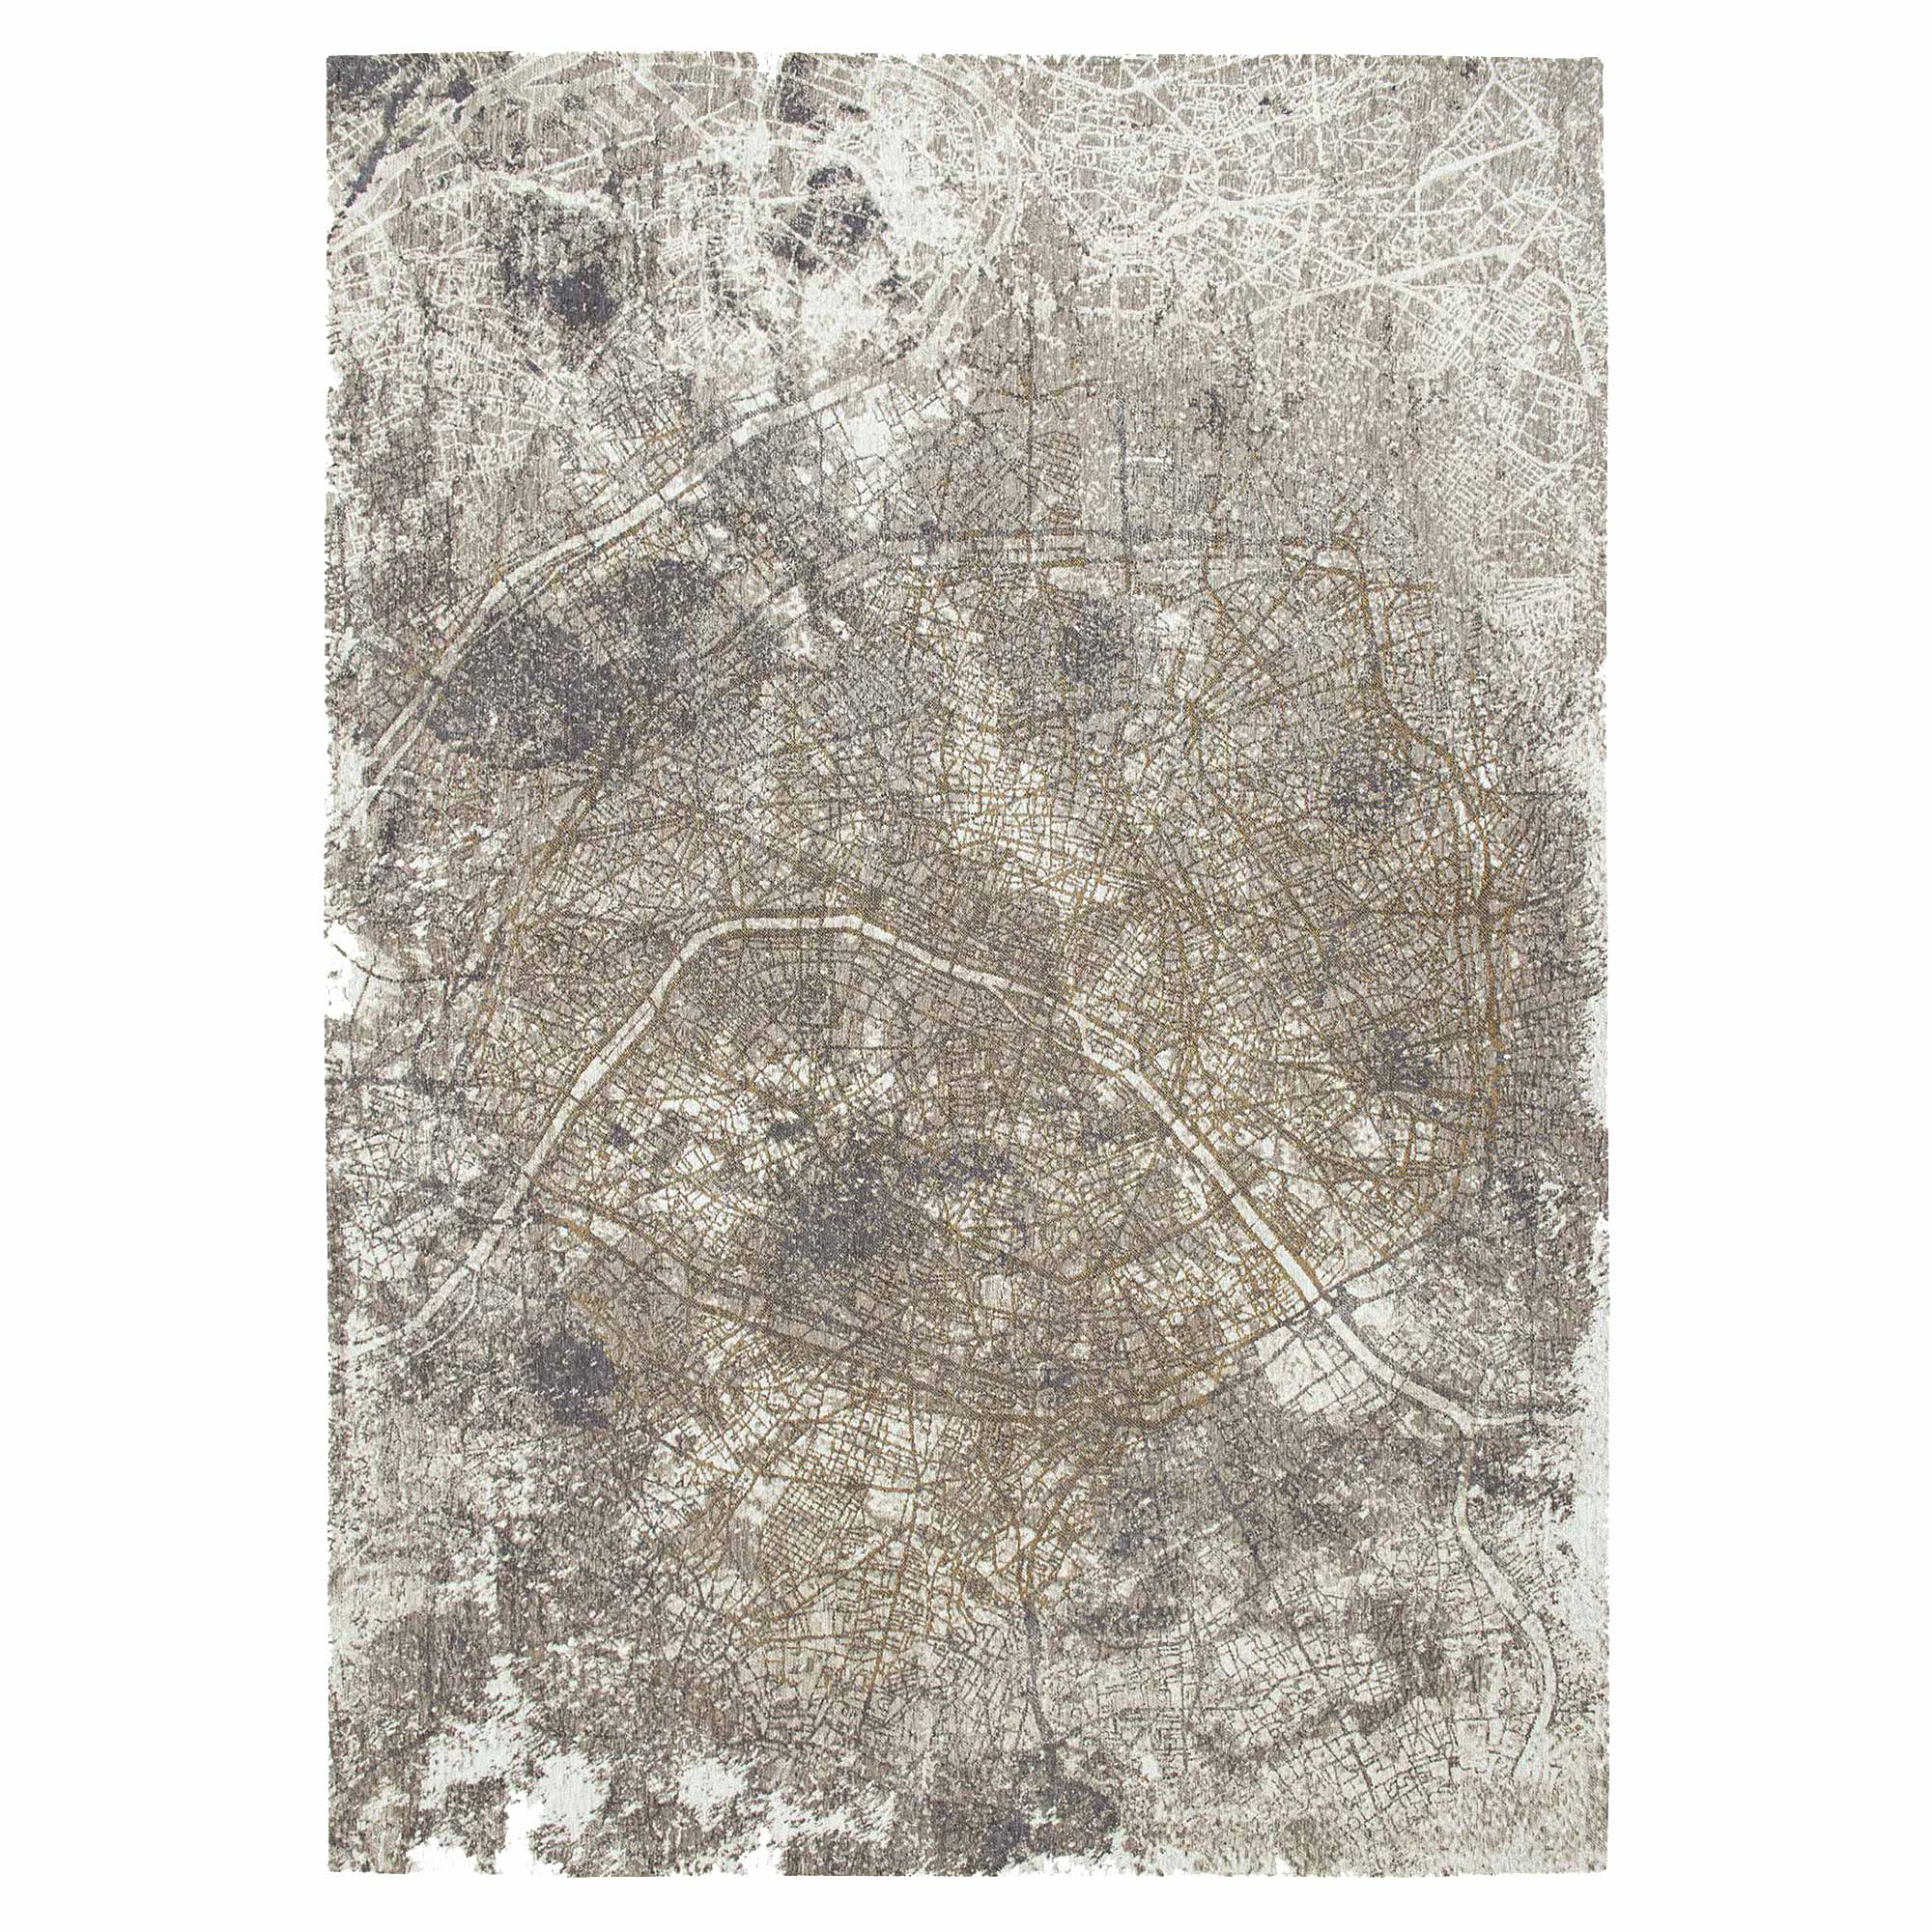 Cities Space Trip 170x240cm Rug, Square, Neutral | Barker & Stonehouse